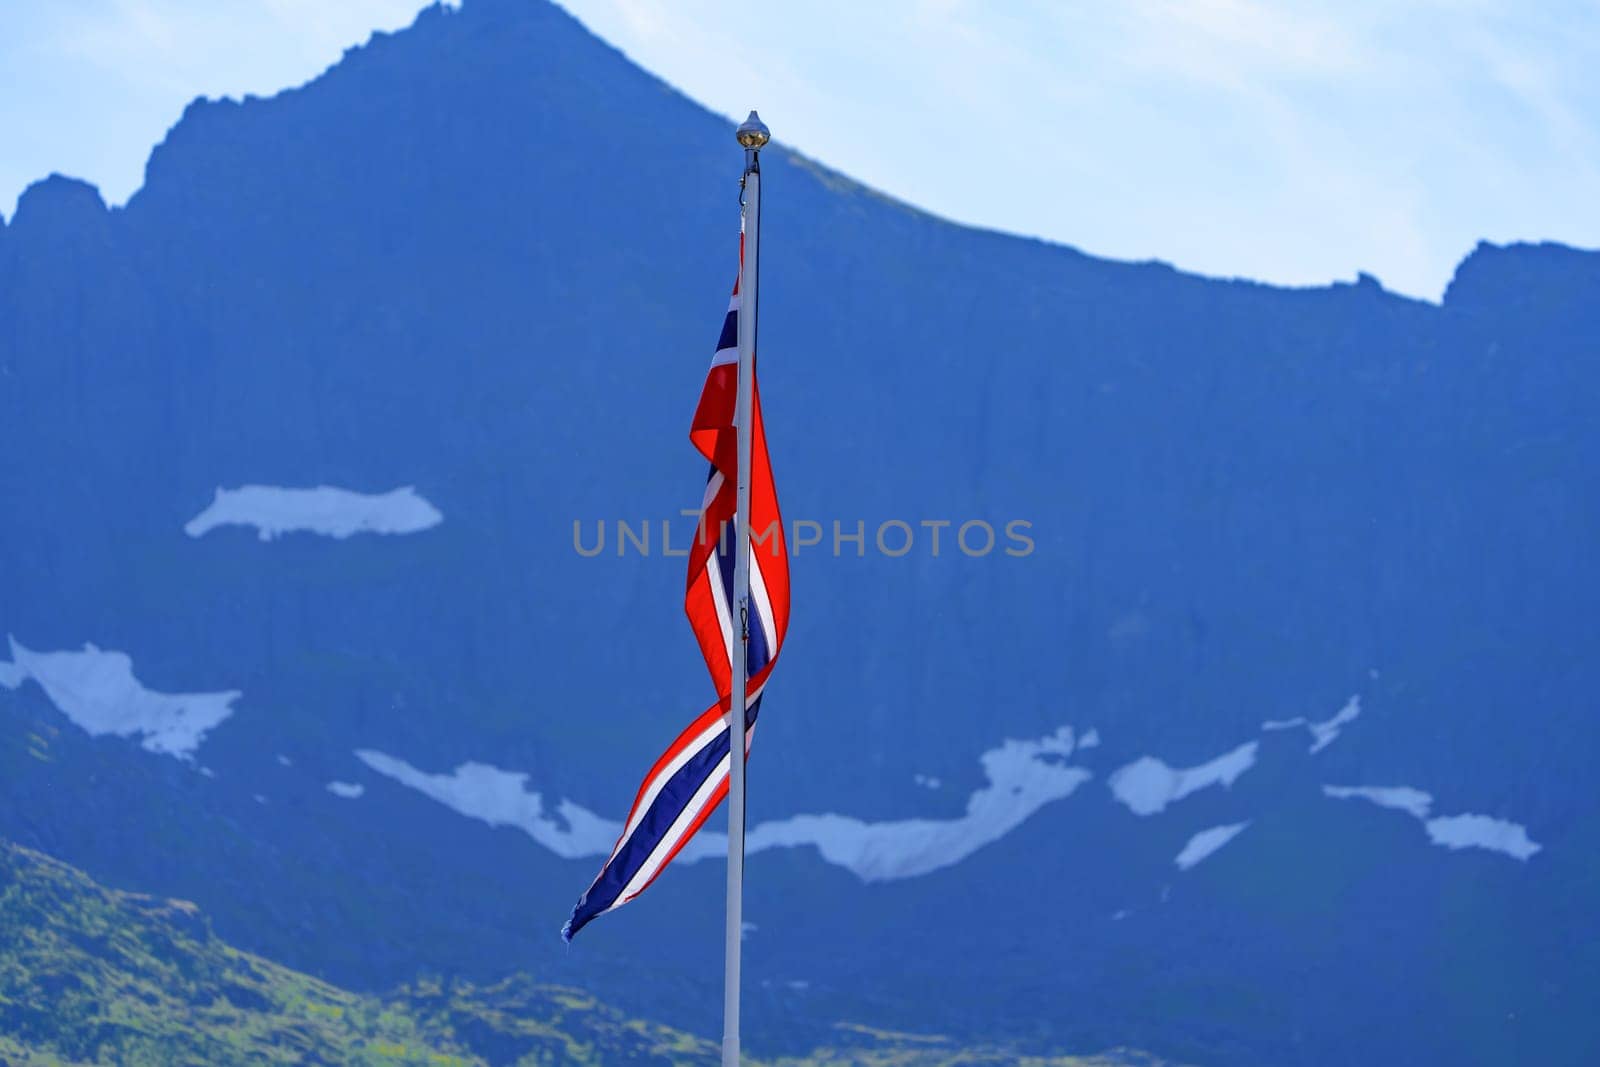 The Norwegian national flag waves proudly in front of a breathtaking mountain range, offering a stunning representation of Norway's natural beauty and national pride.